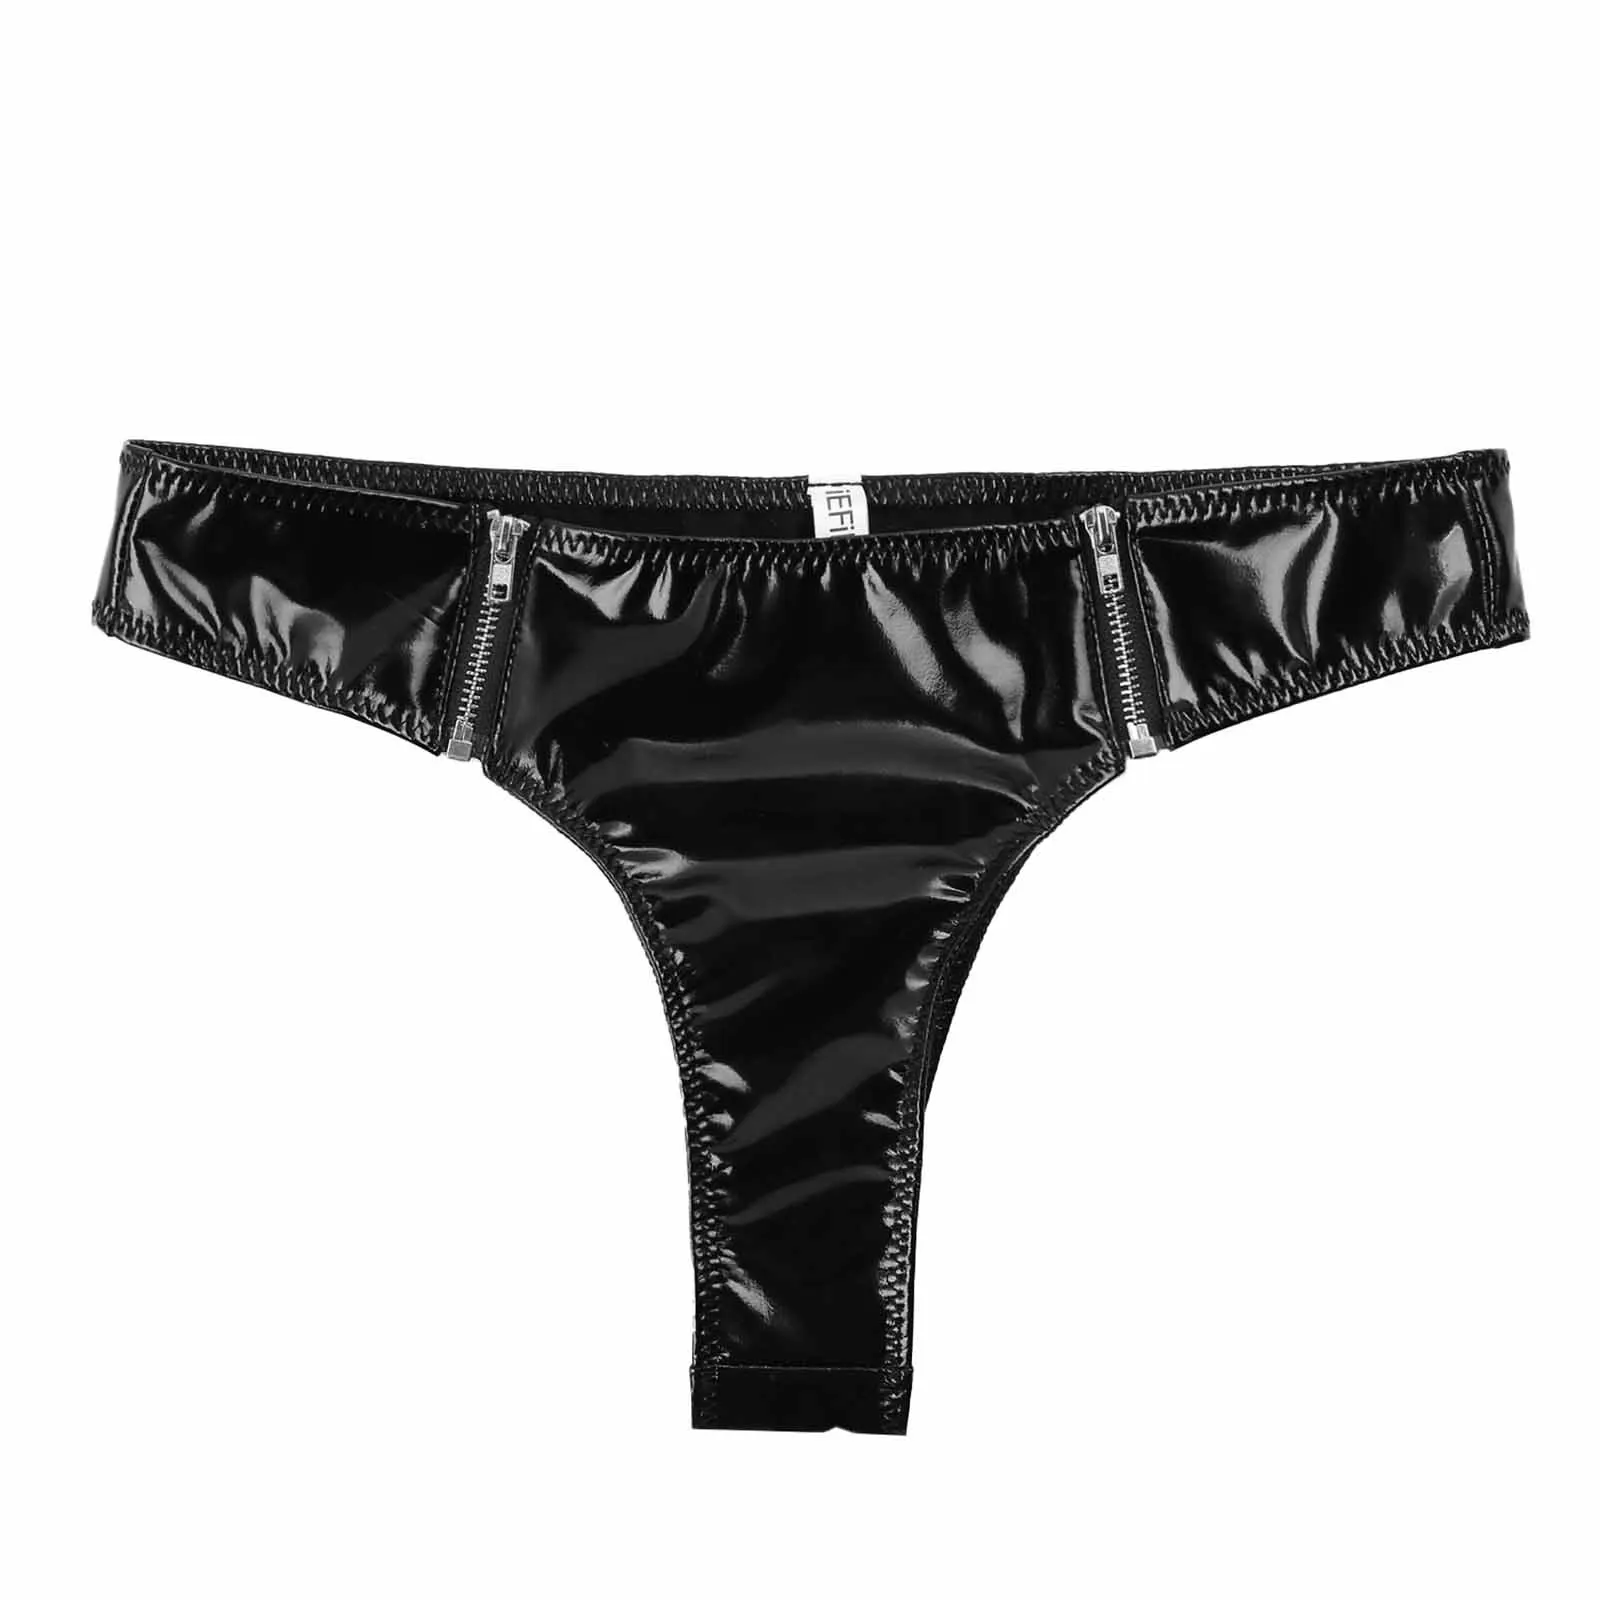 Womens Lingerie Bikini Underwear Shiny Patent Leather Thong Briefs Panties Low-waisted Sexy Front Zipper Underpants Clubwear